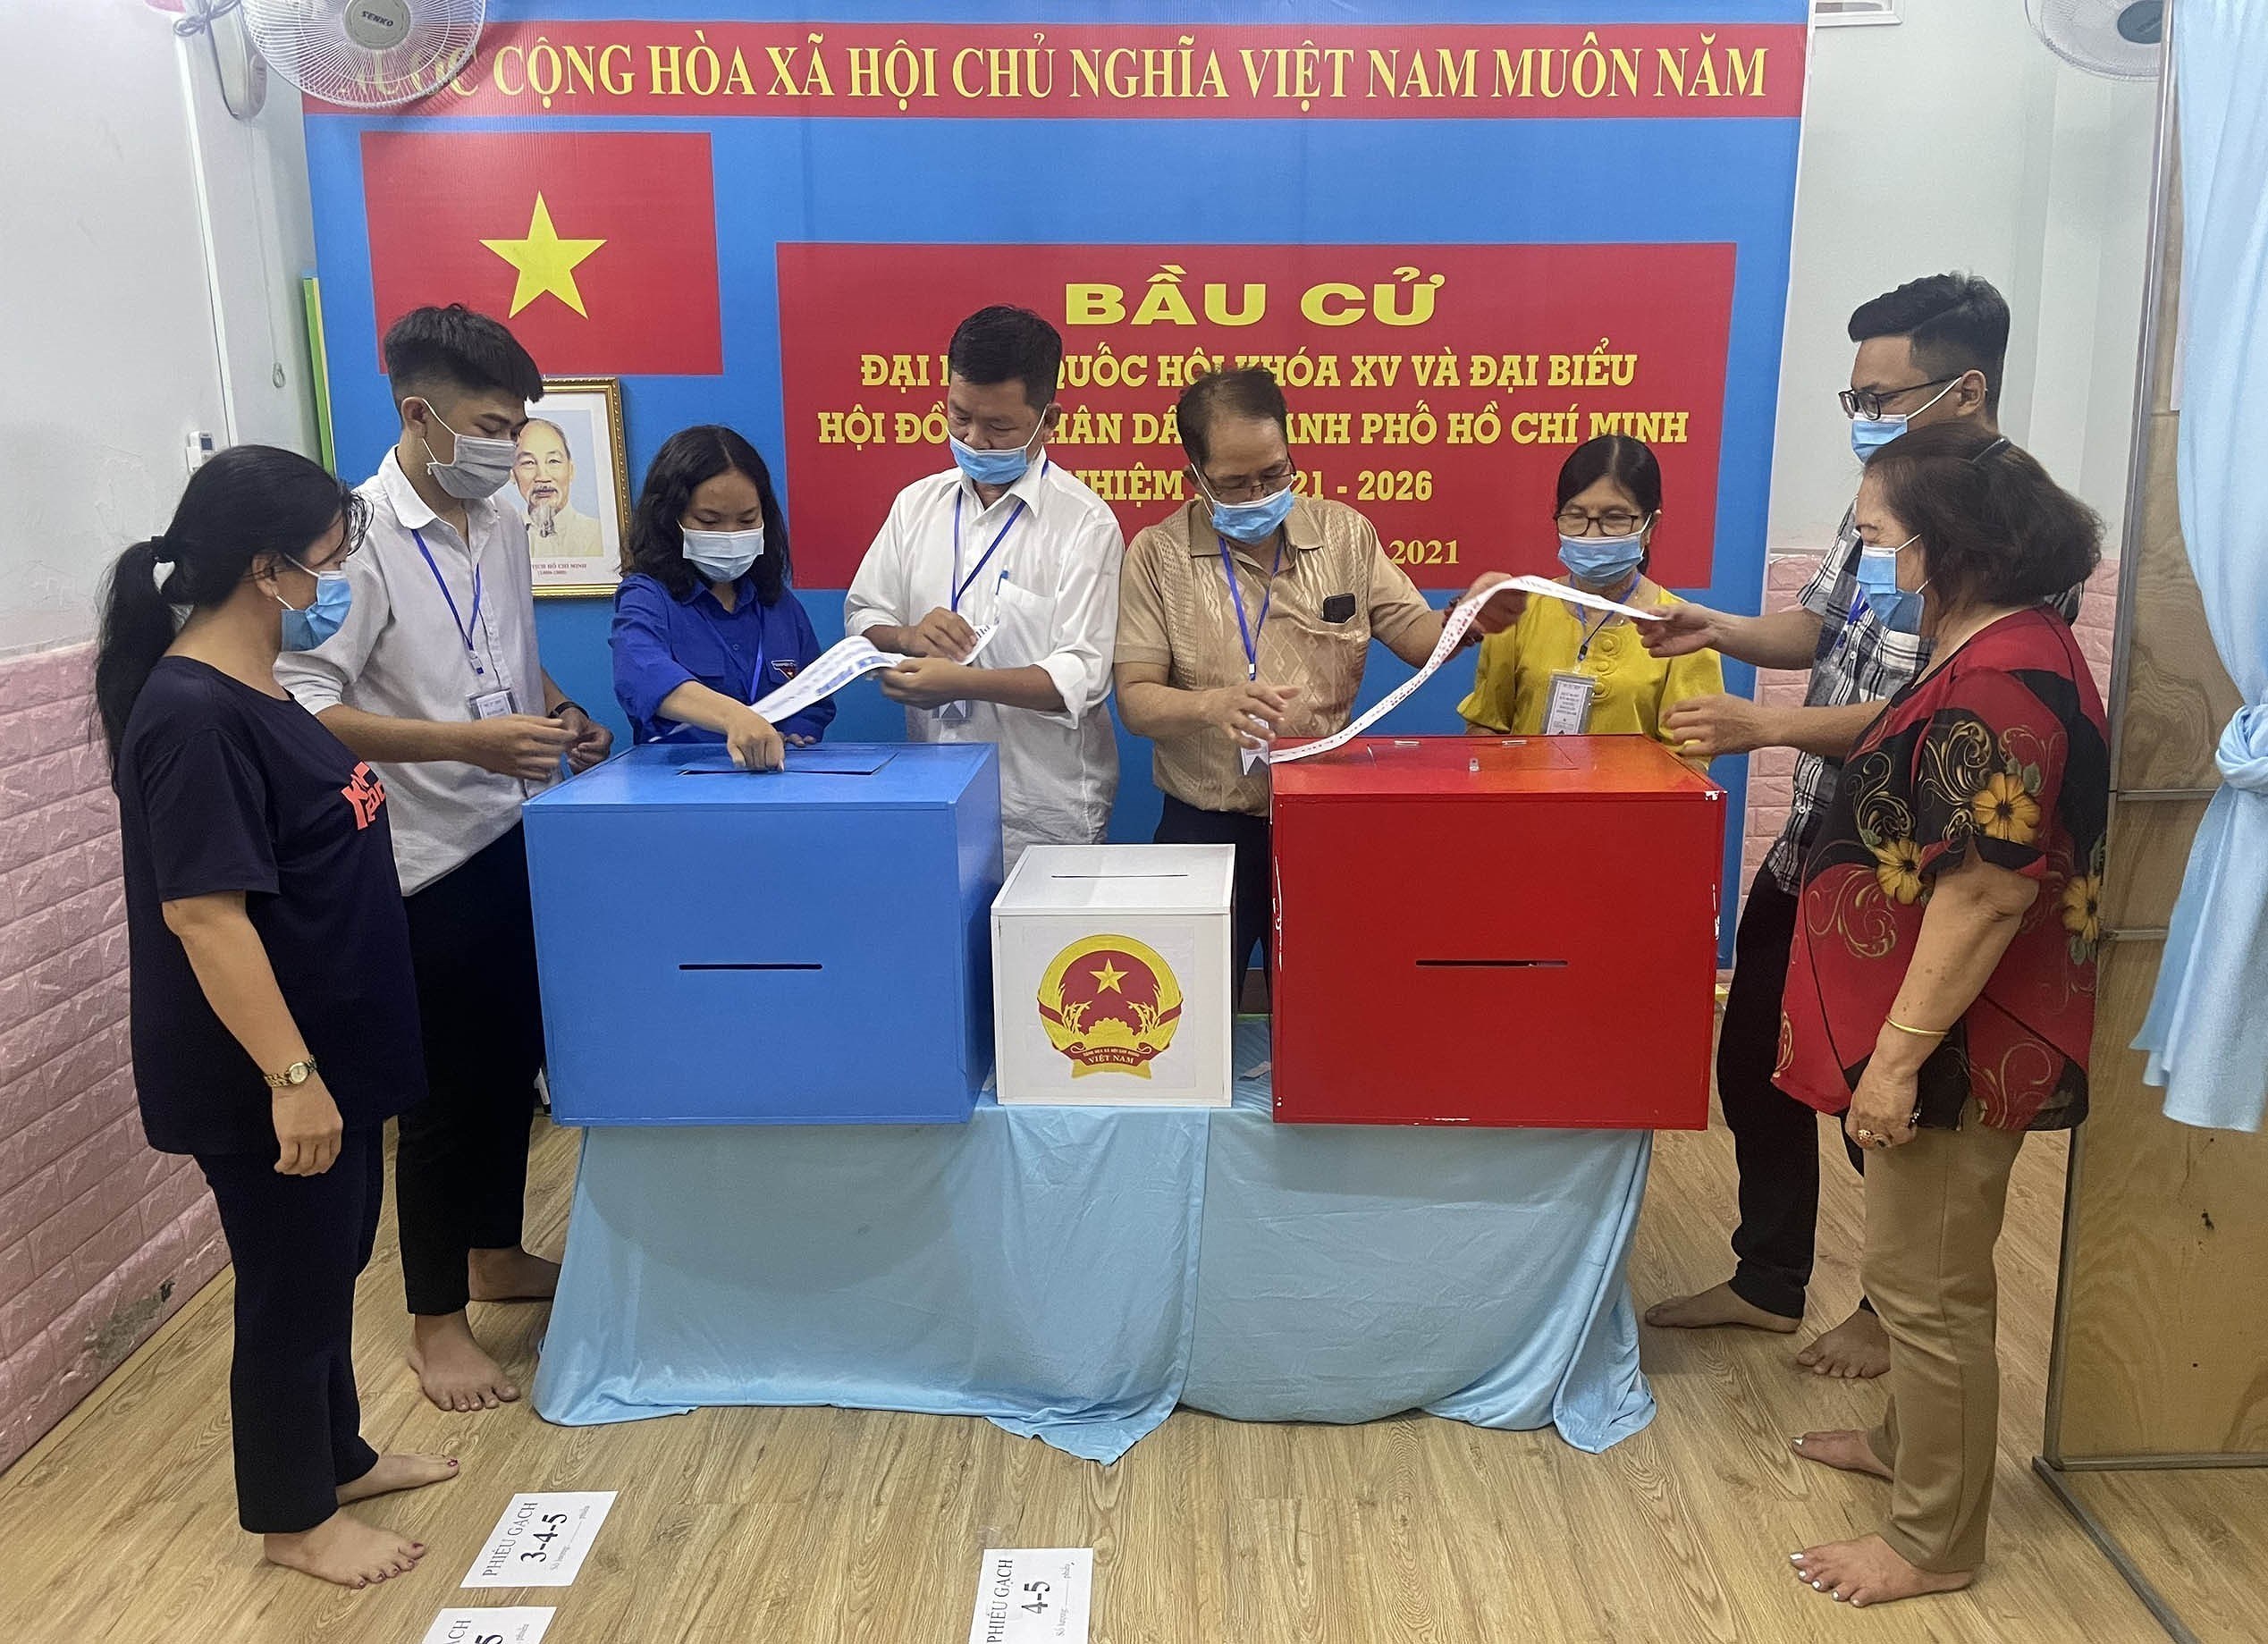 National election: turnout rate at 95.65 percent as of 17:30 hinh anh 2